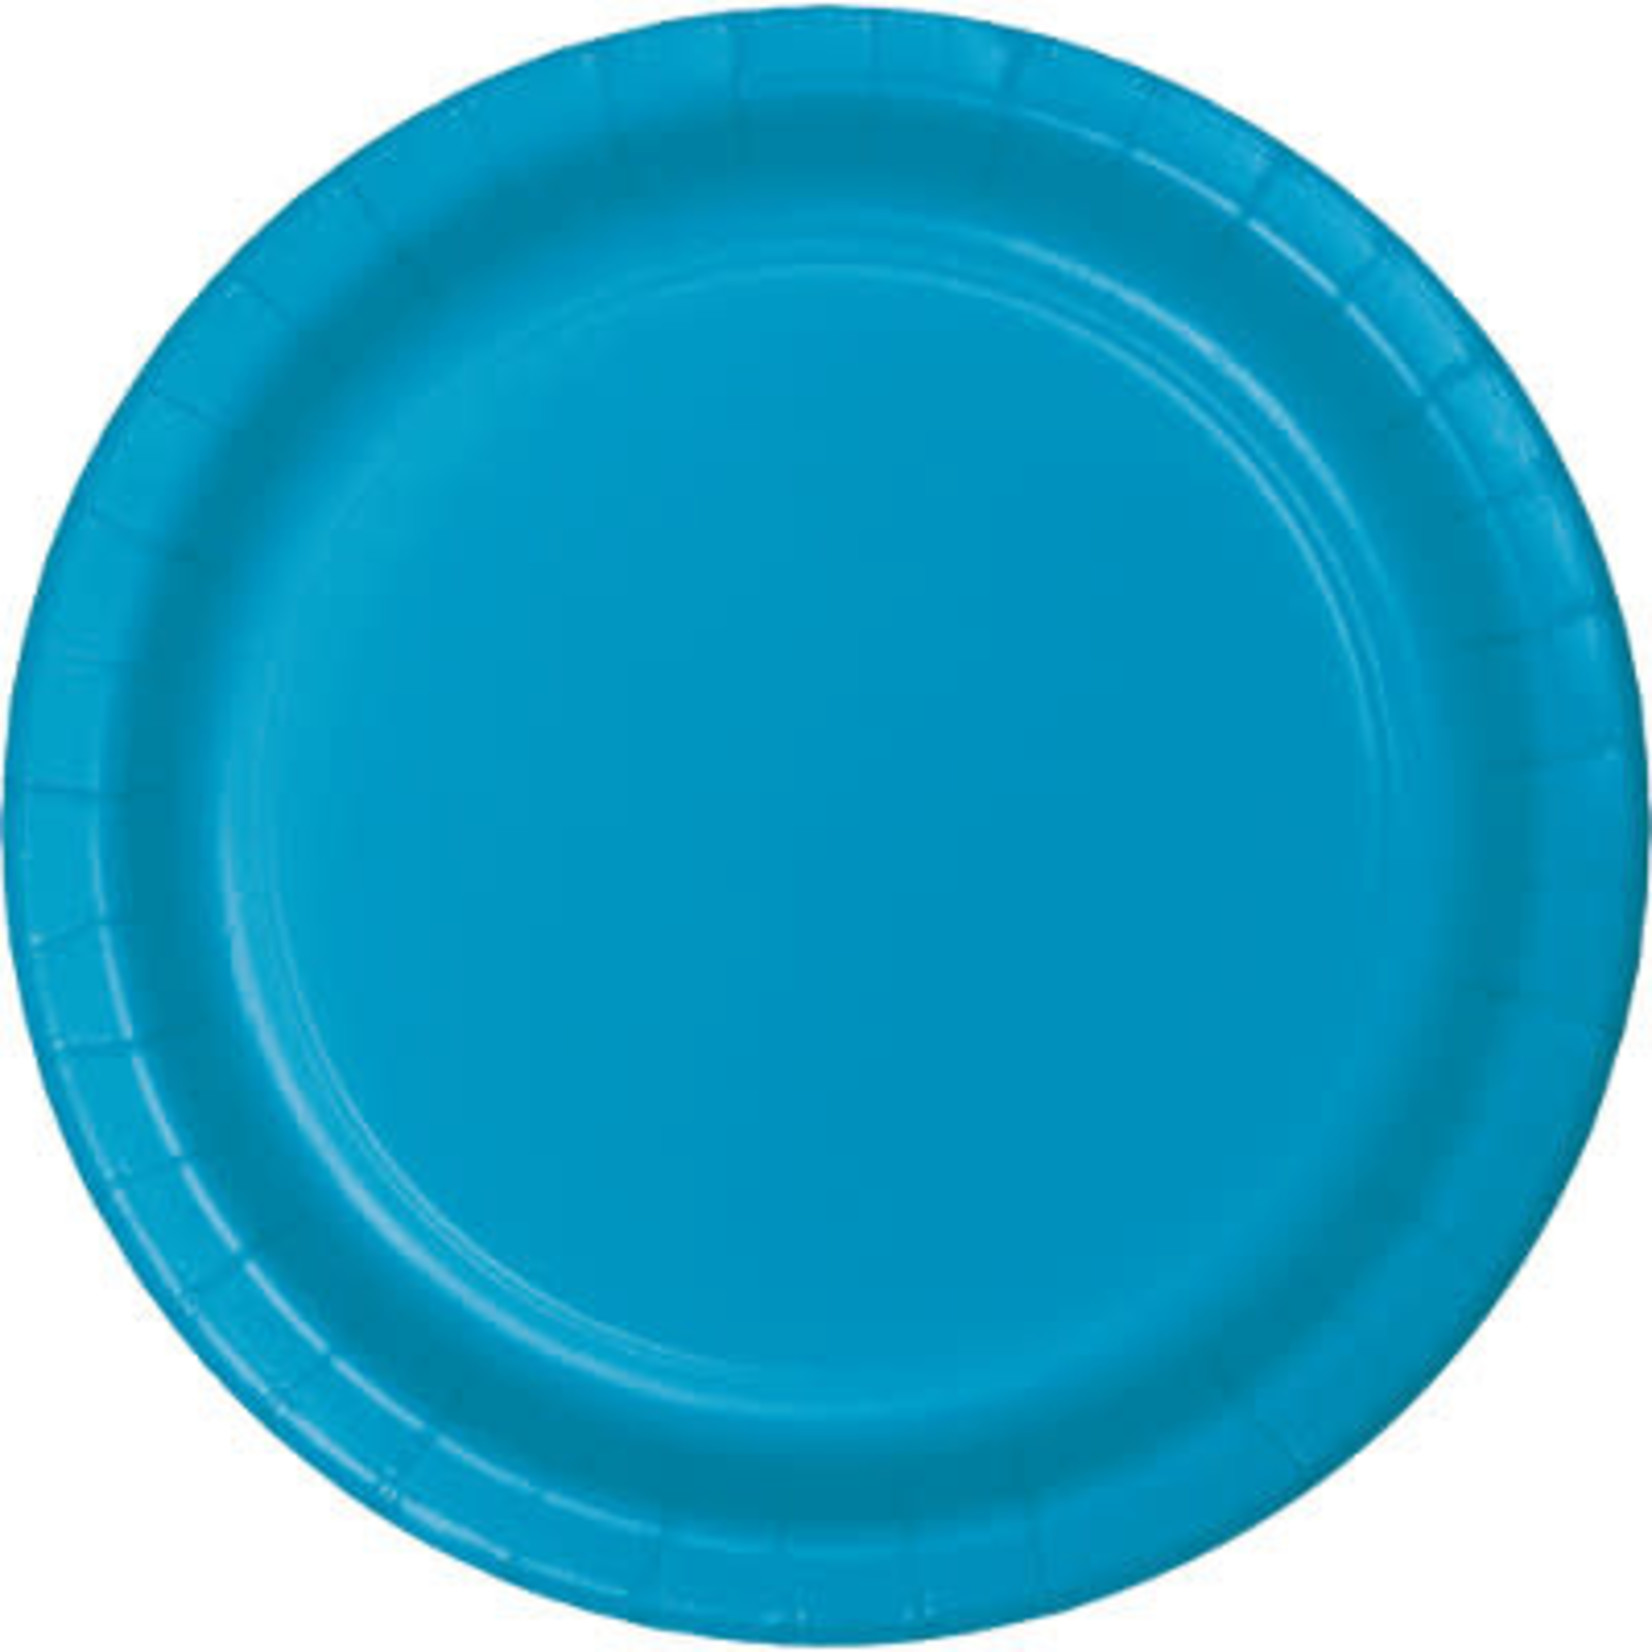 Touch of Color 10" Turquoise Blue Paper Banquet Plates - 24ct.